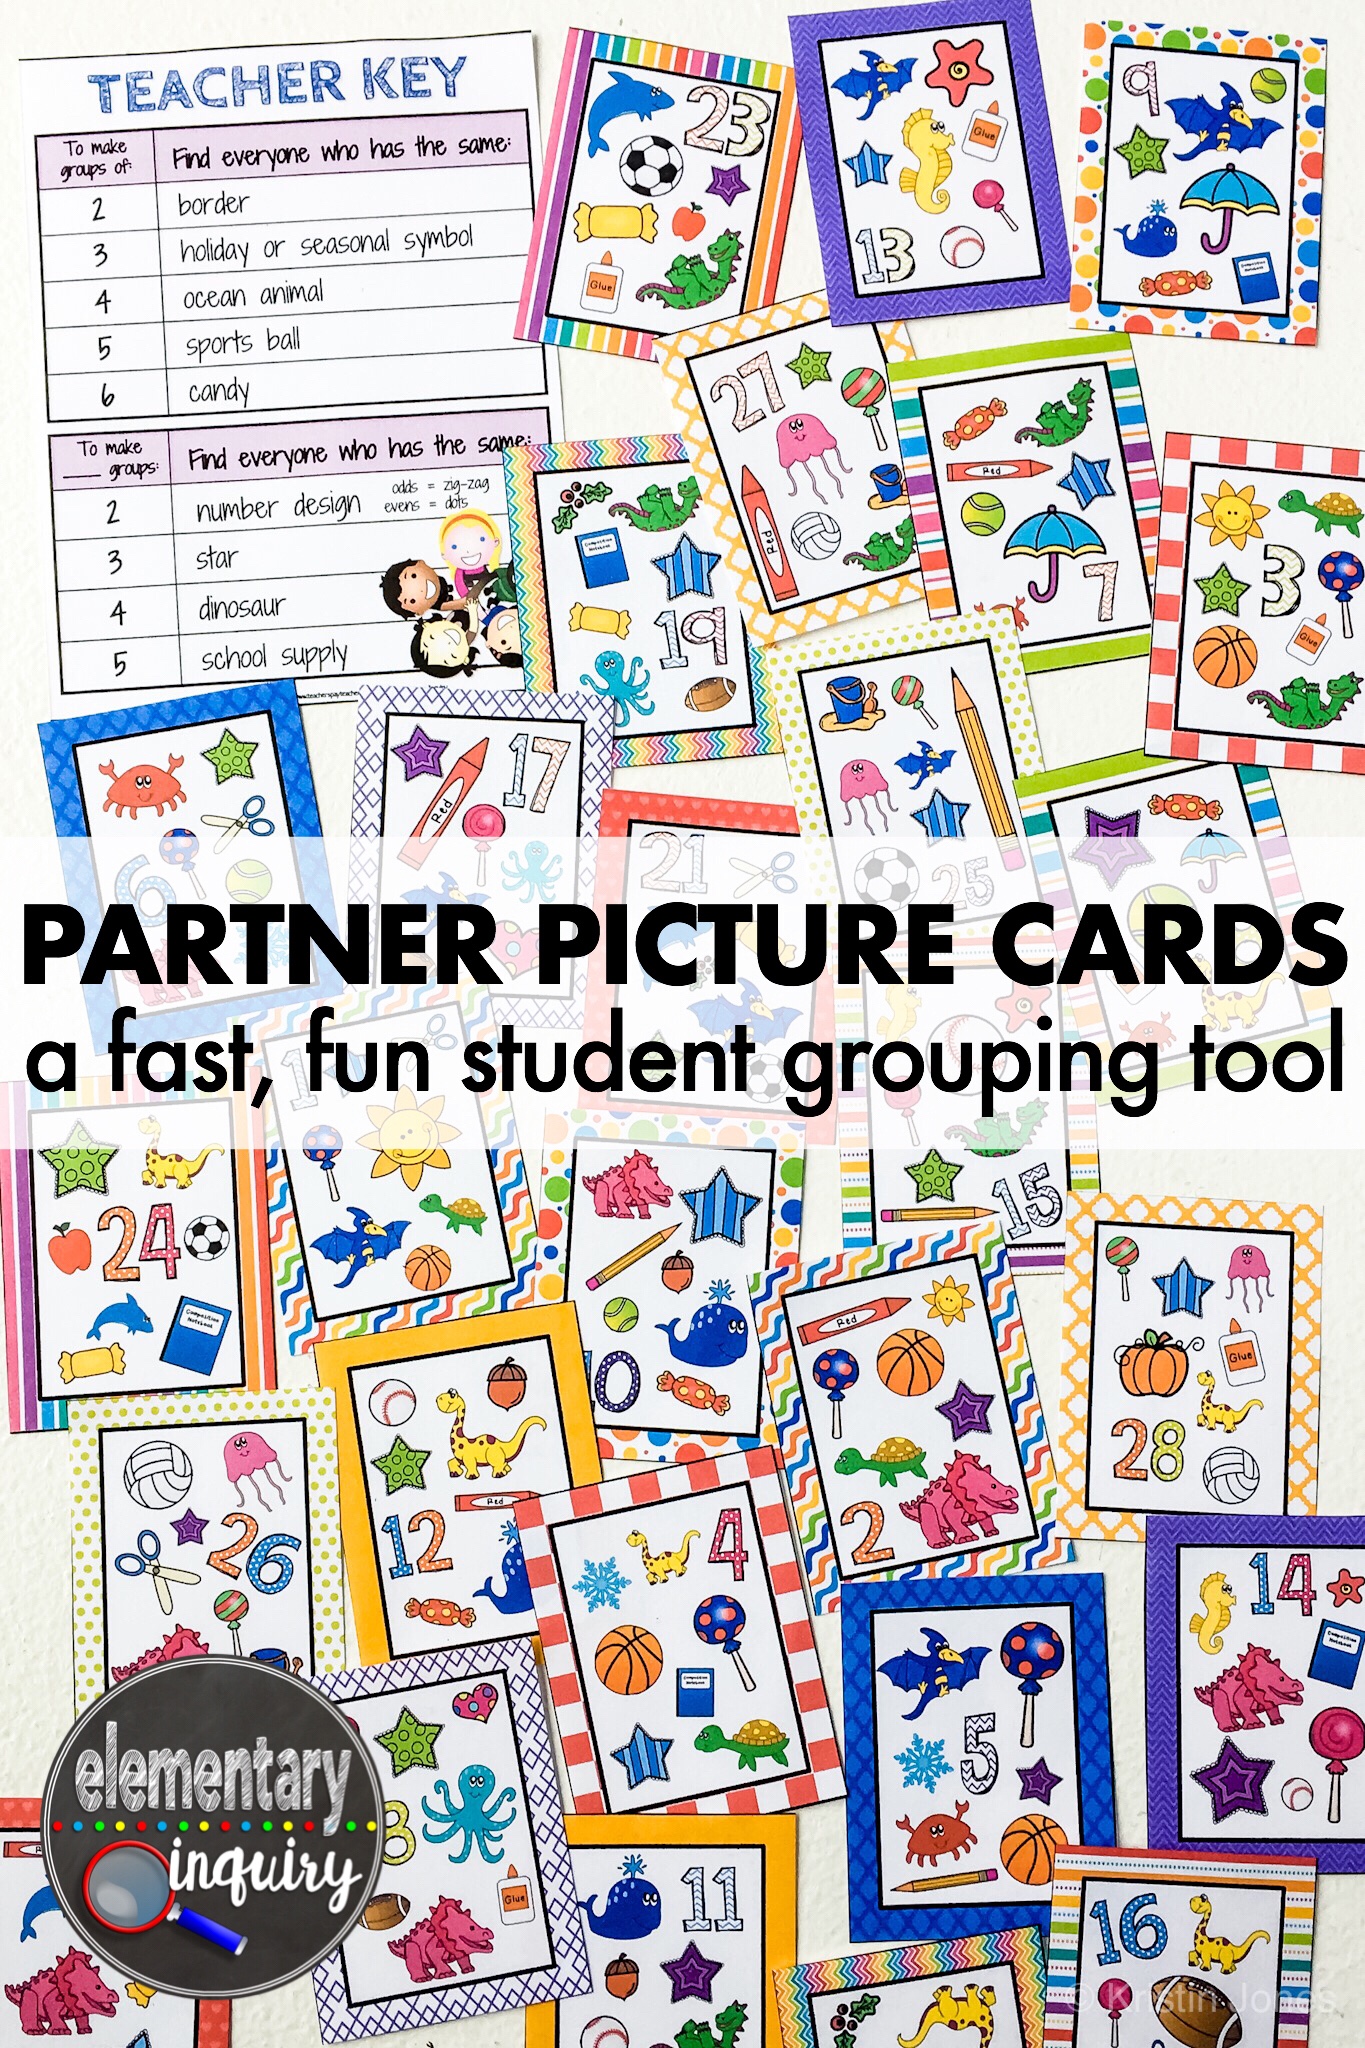 partner picture cards for flexible student grouping in upper elementary